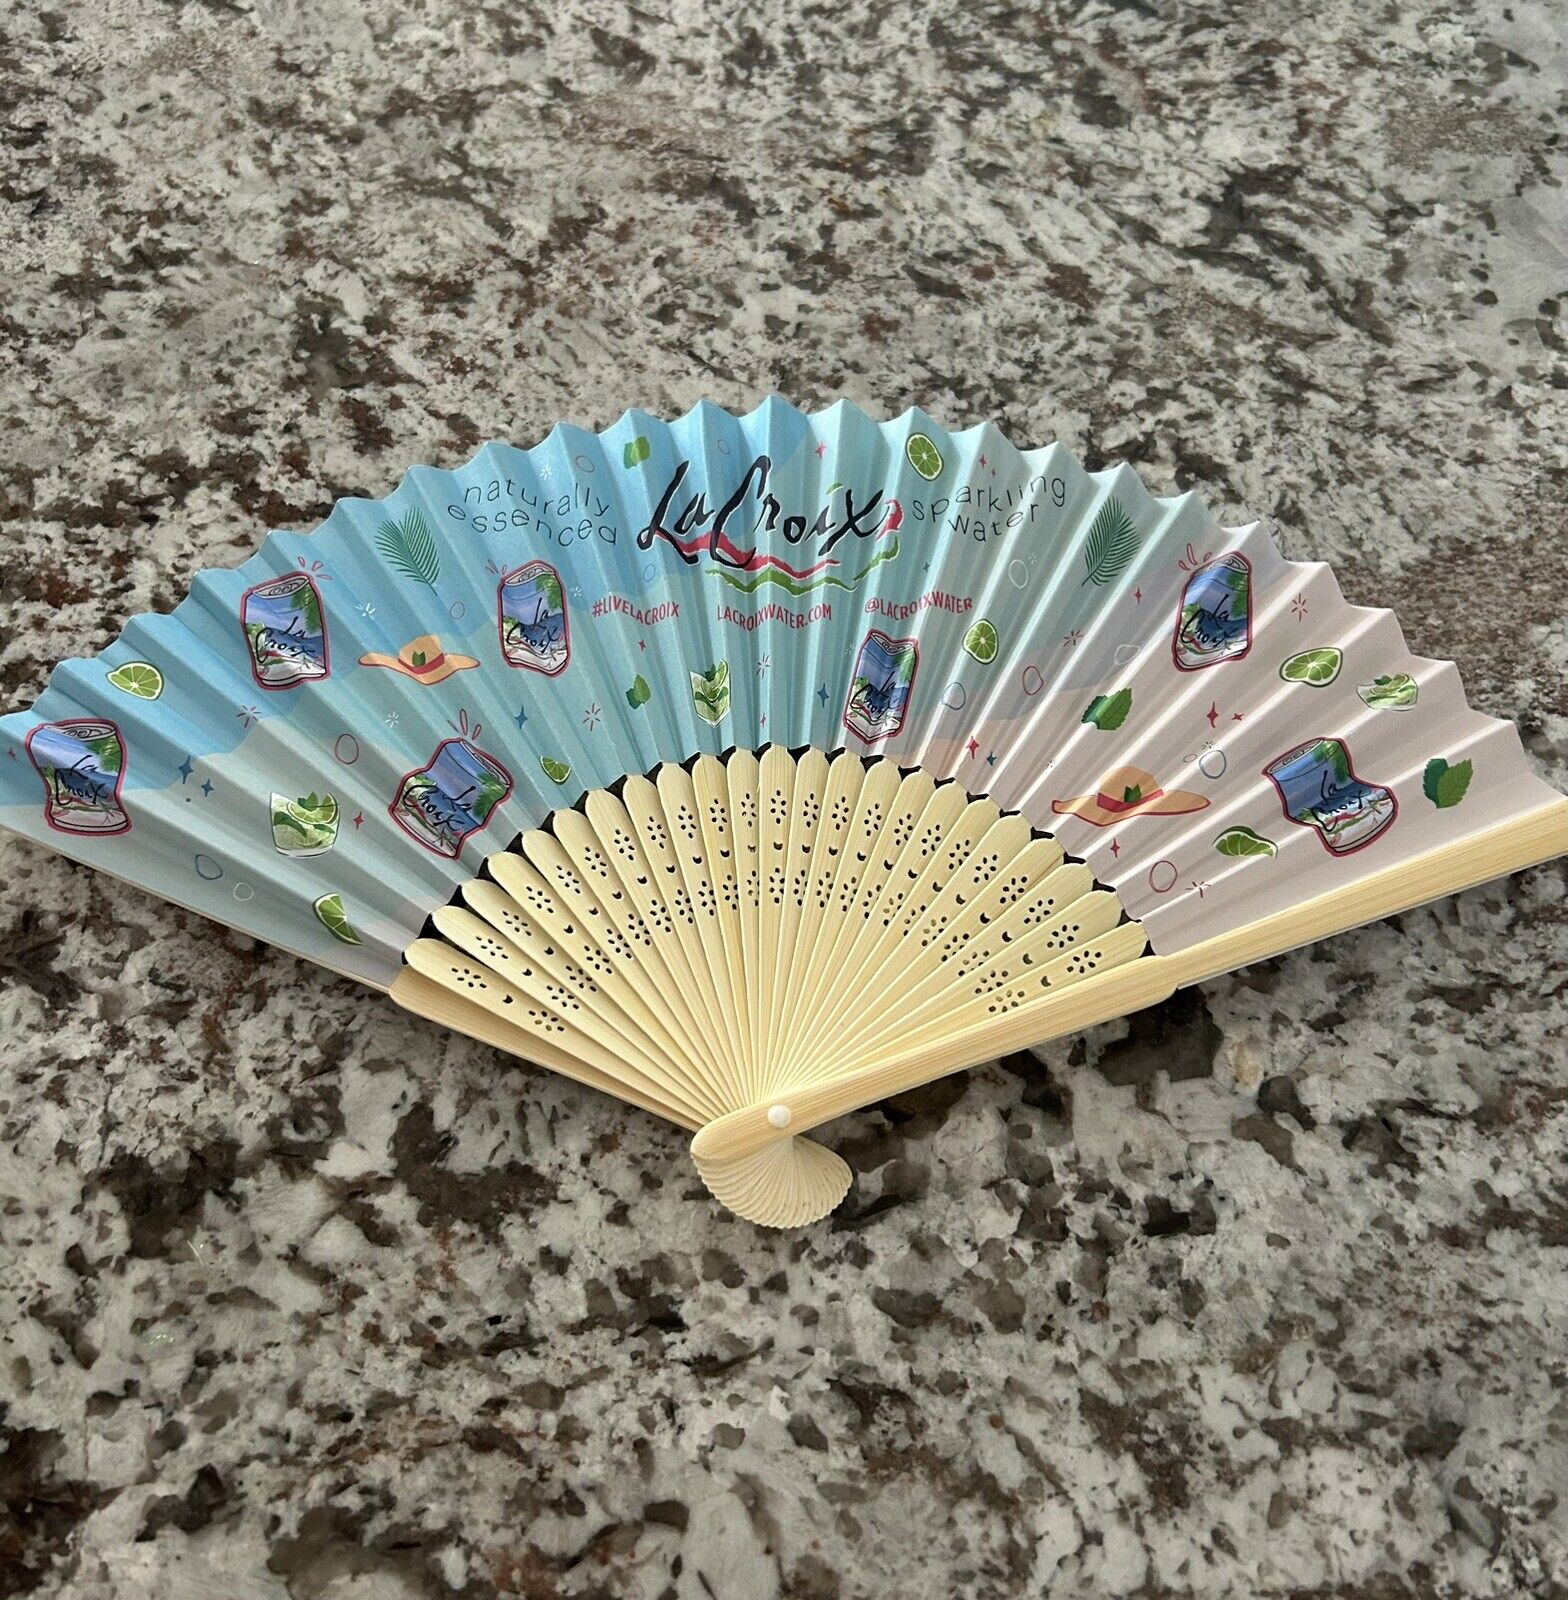 NEW Hand-Held Manual Hand Fan, Portable, Travel, Fits In Purse, La Croix Water